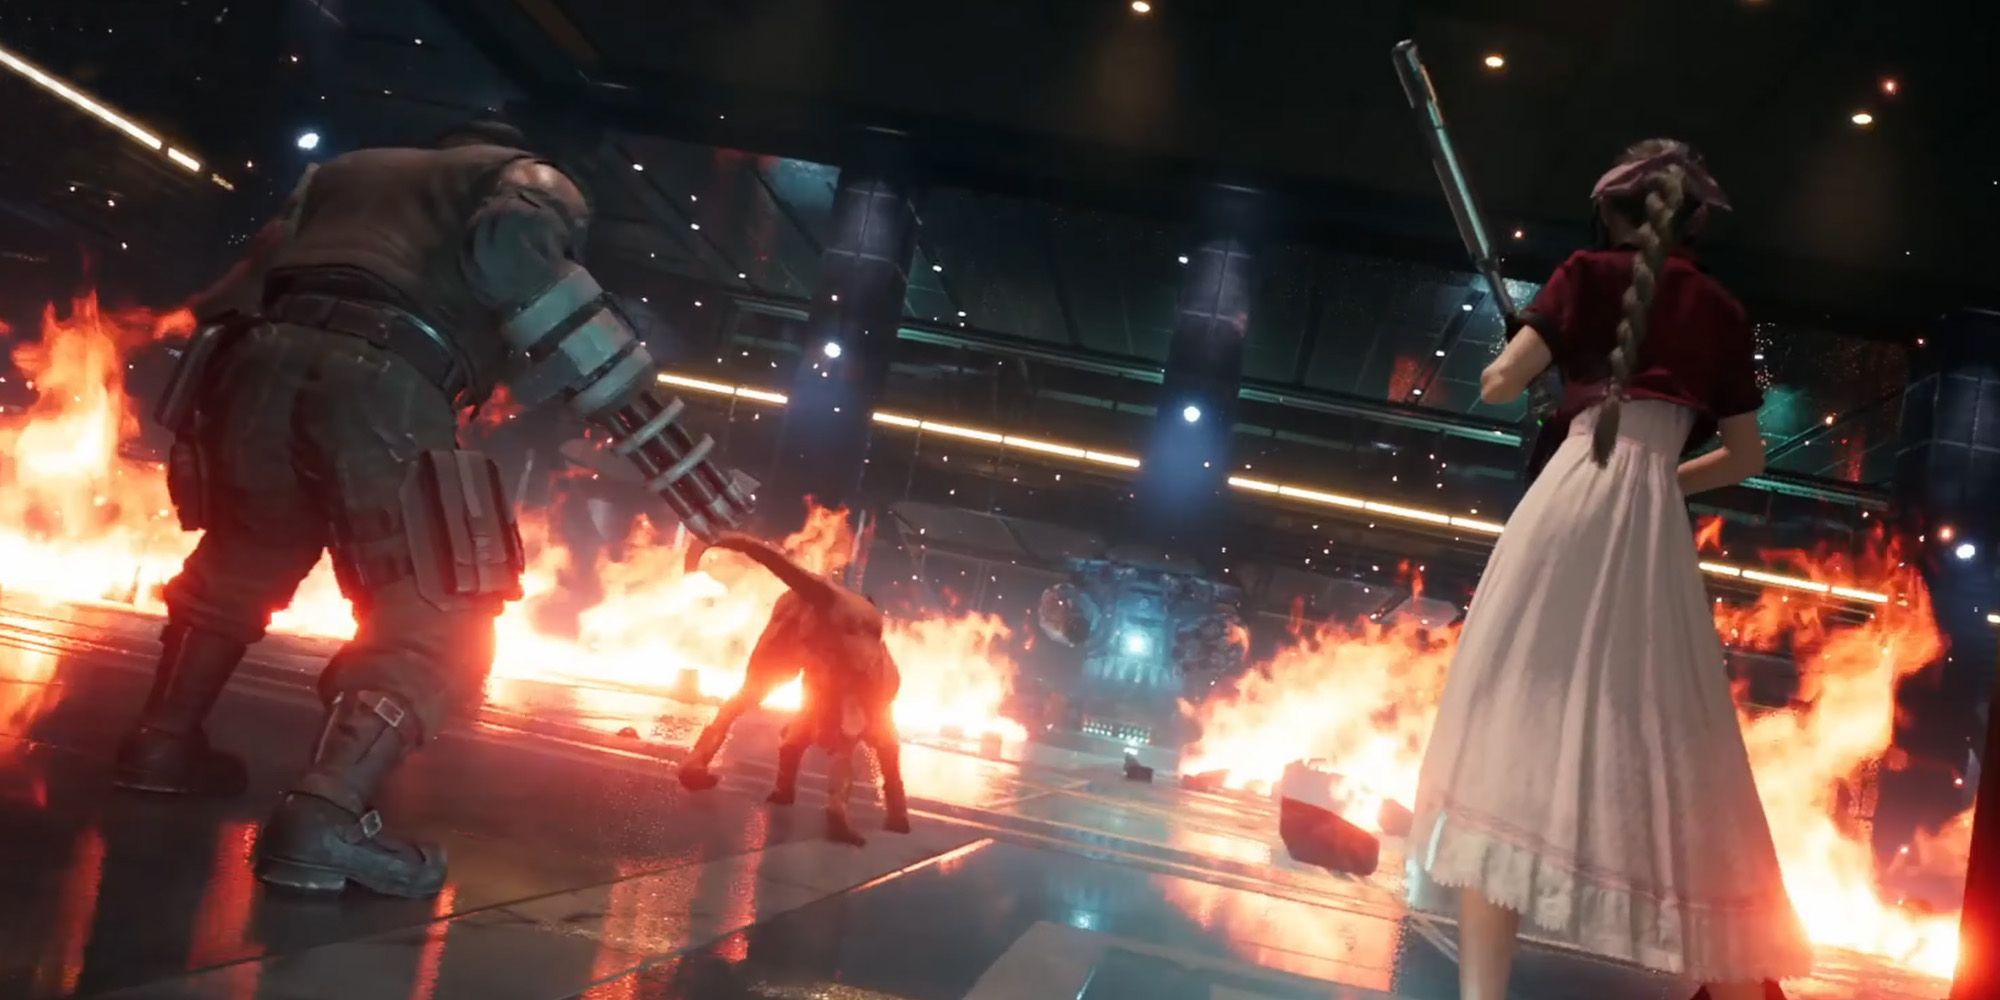 The final phase of the battle with the Arsenal in Final Fantasy VII Remake